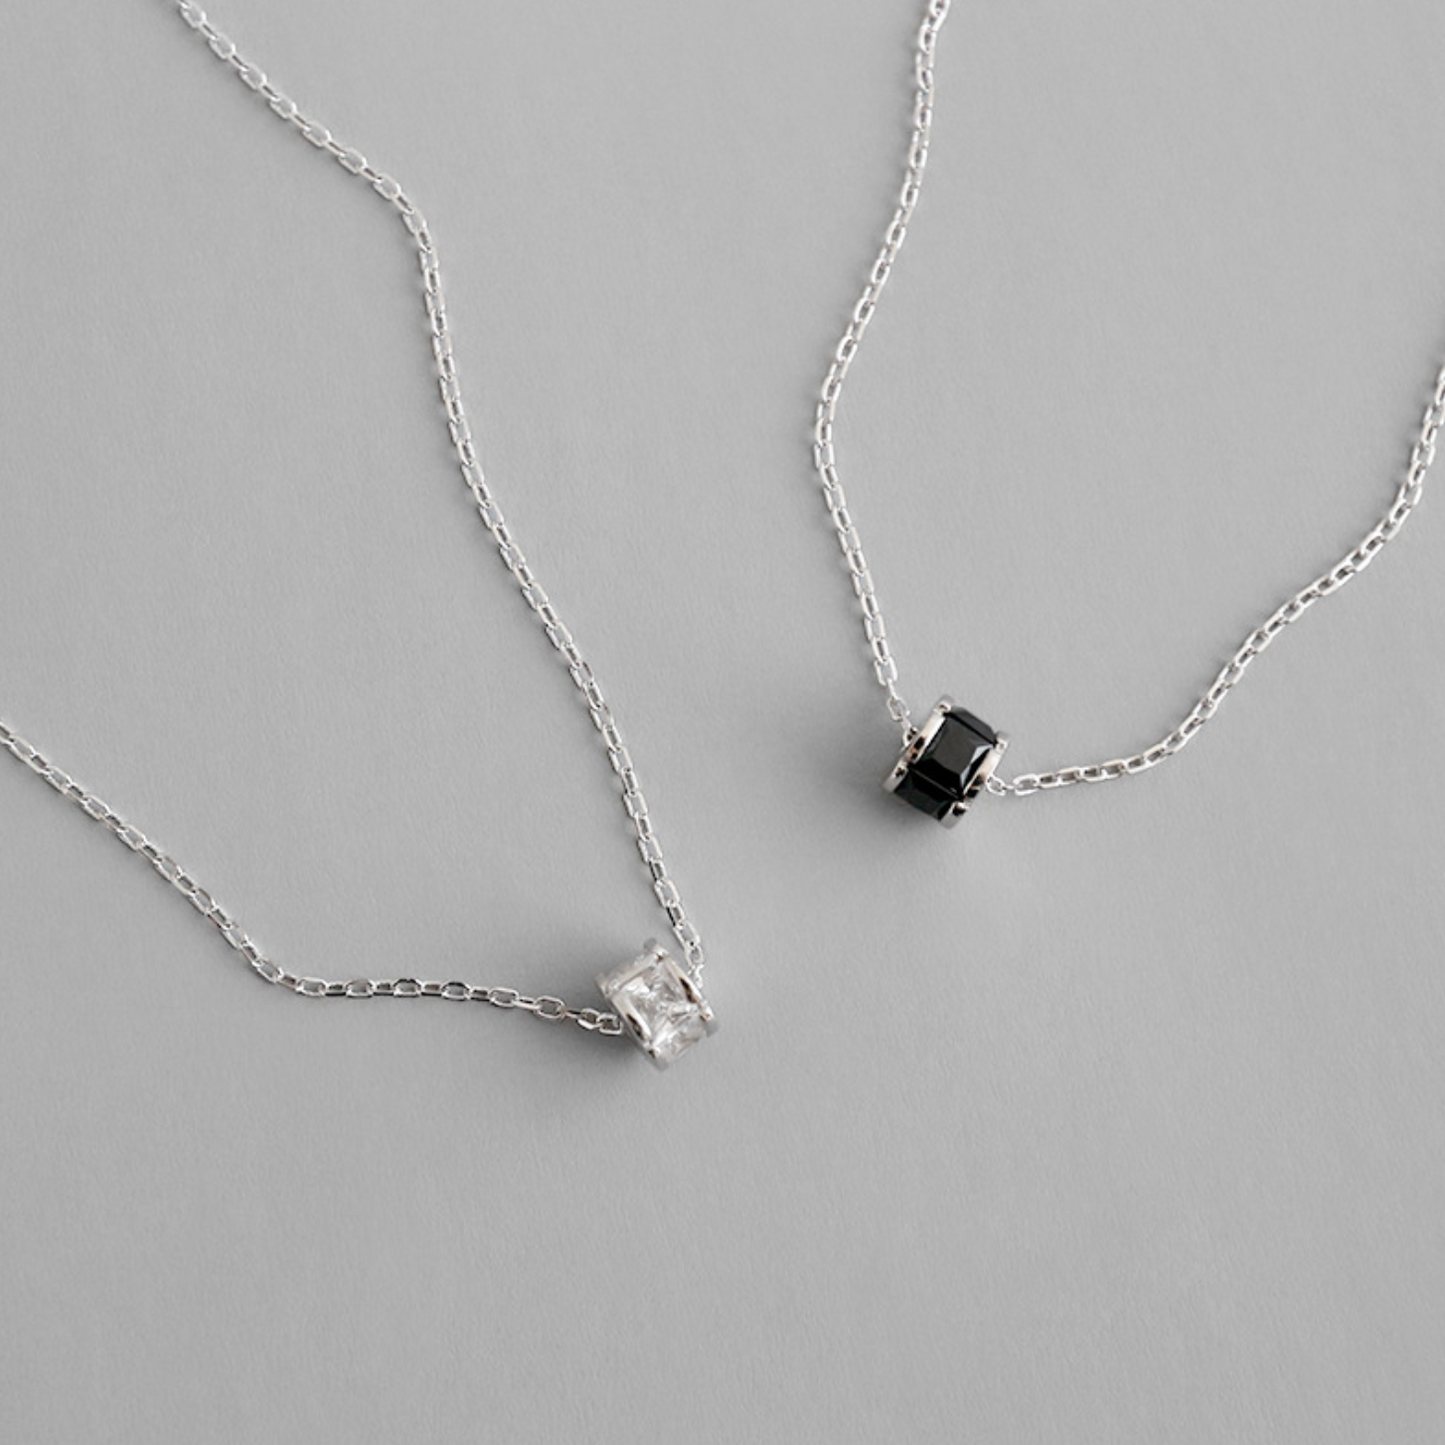 Black or White Crystal Bead Pendant Necklace